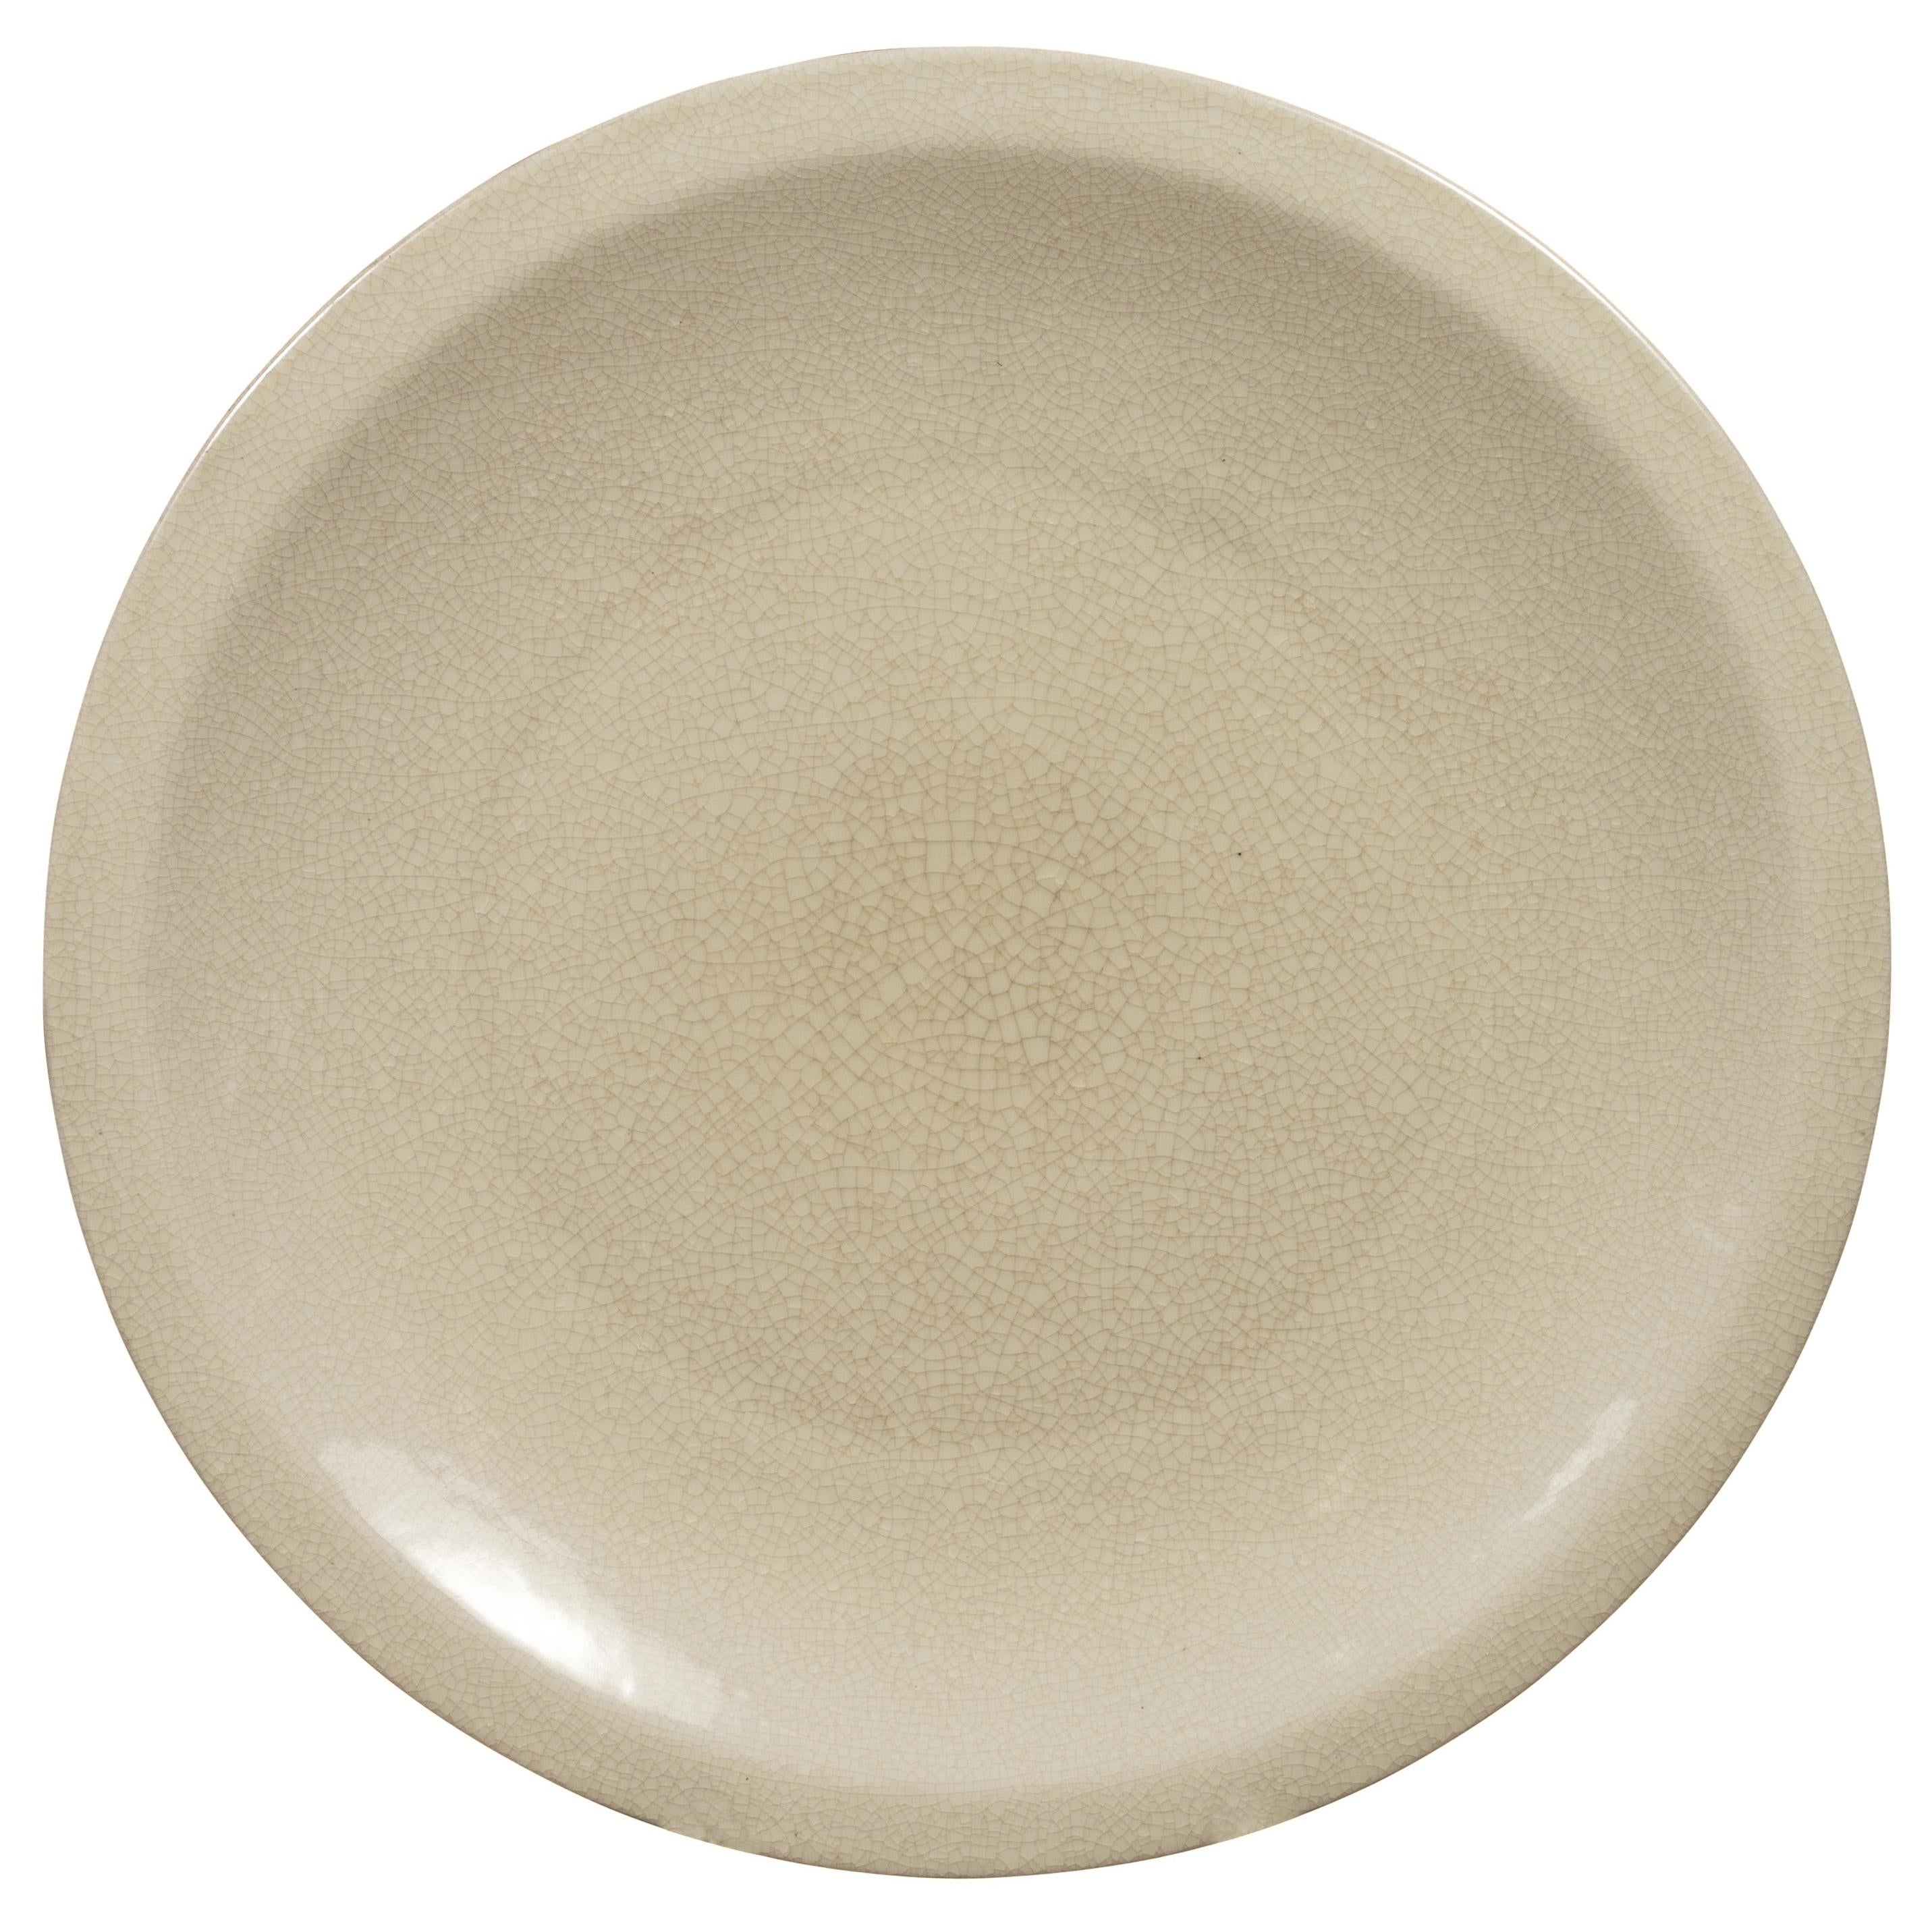 Vintage Chinese Beige Ceramic Charger Plate from the 1980s